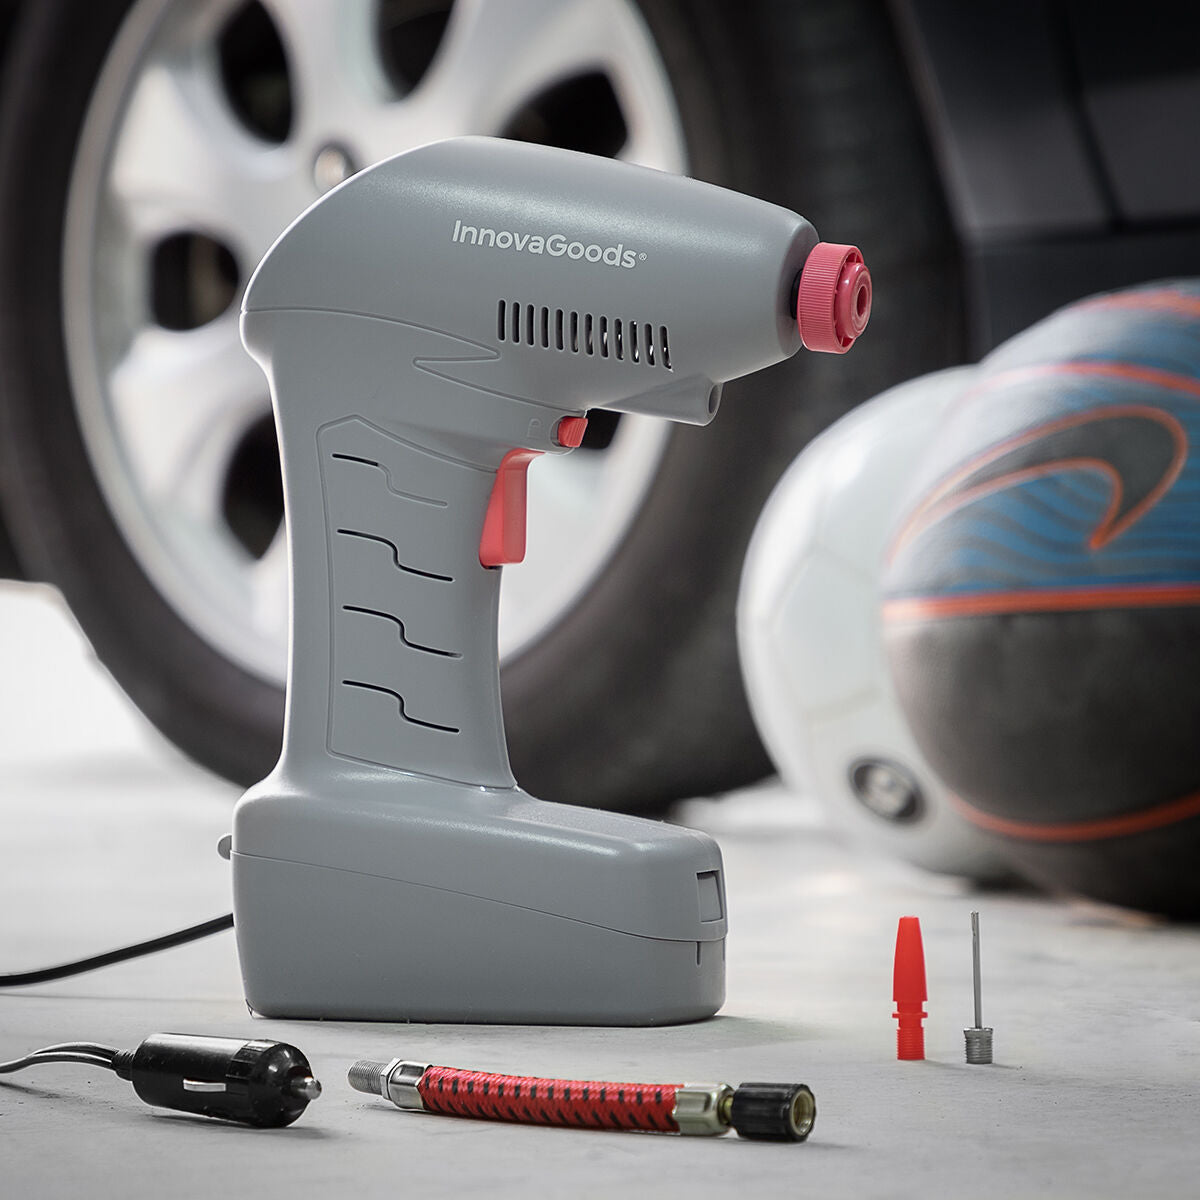 Portable Air Compressor with LED Light. Airpro+ InnovaGoods